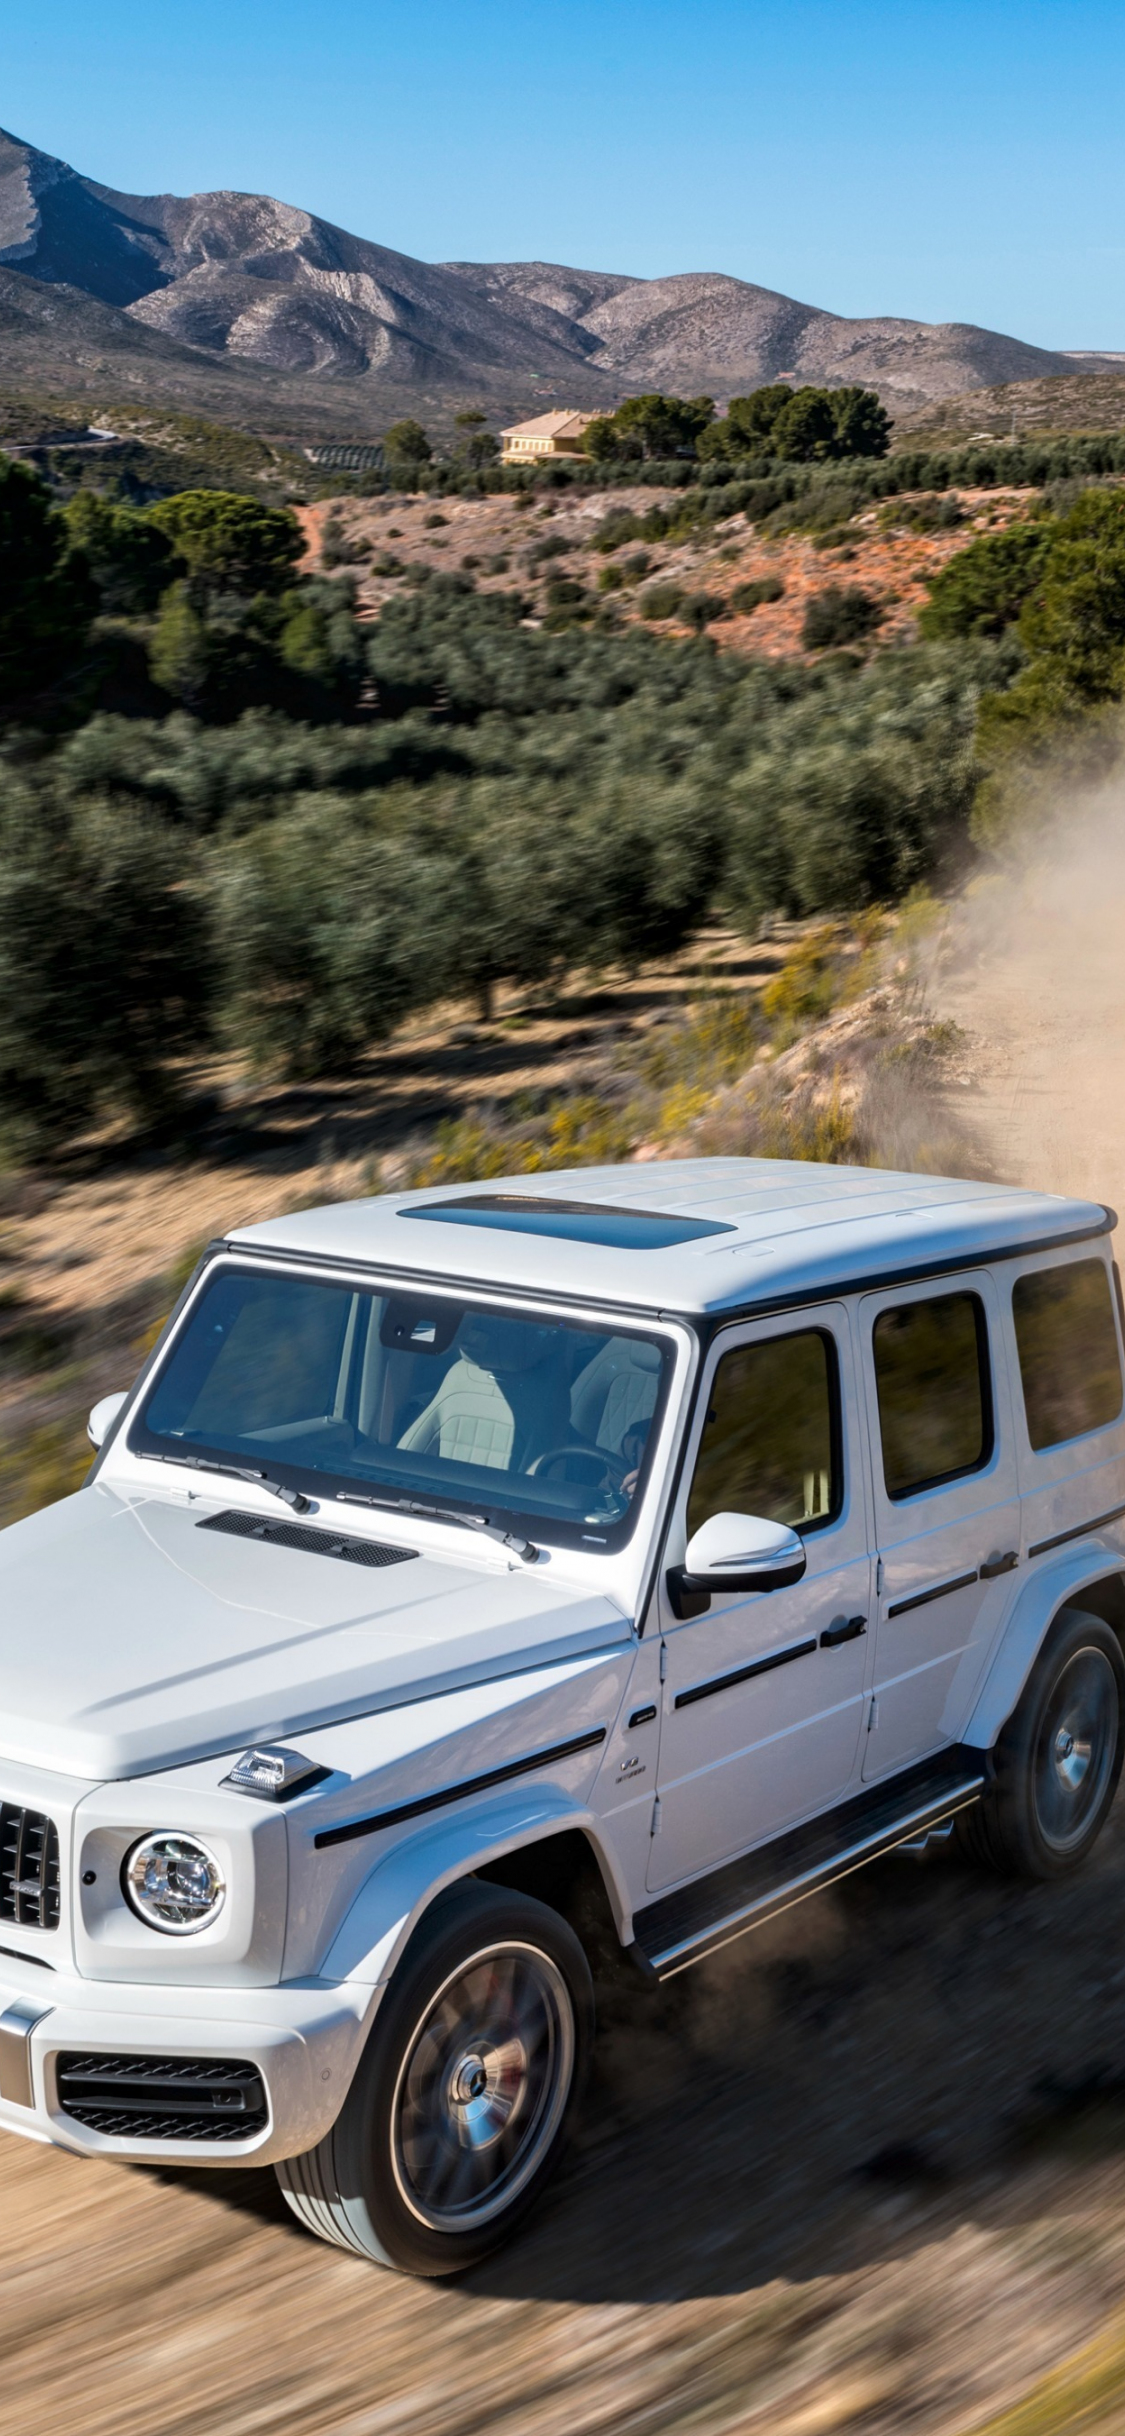 Wallpaper White Mercedes Benz g Class on Road During Daytime, Background -  Download Free Image